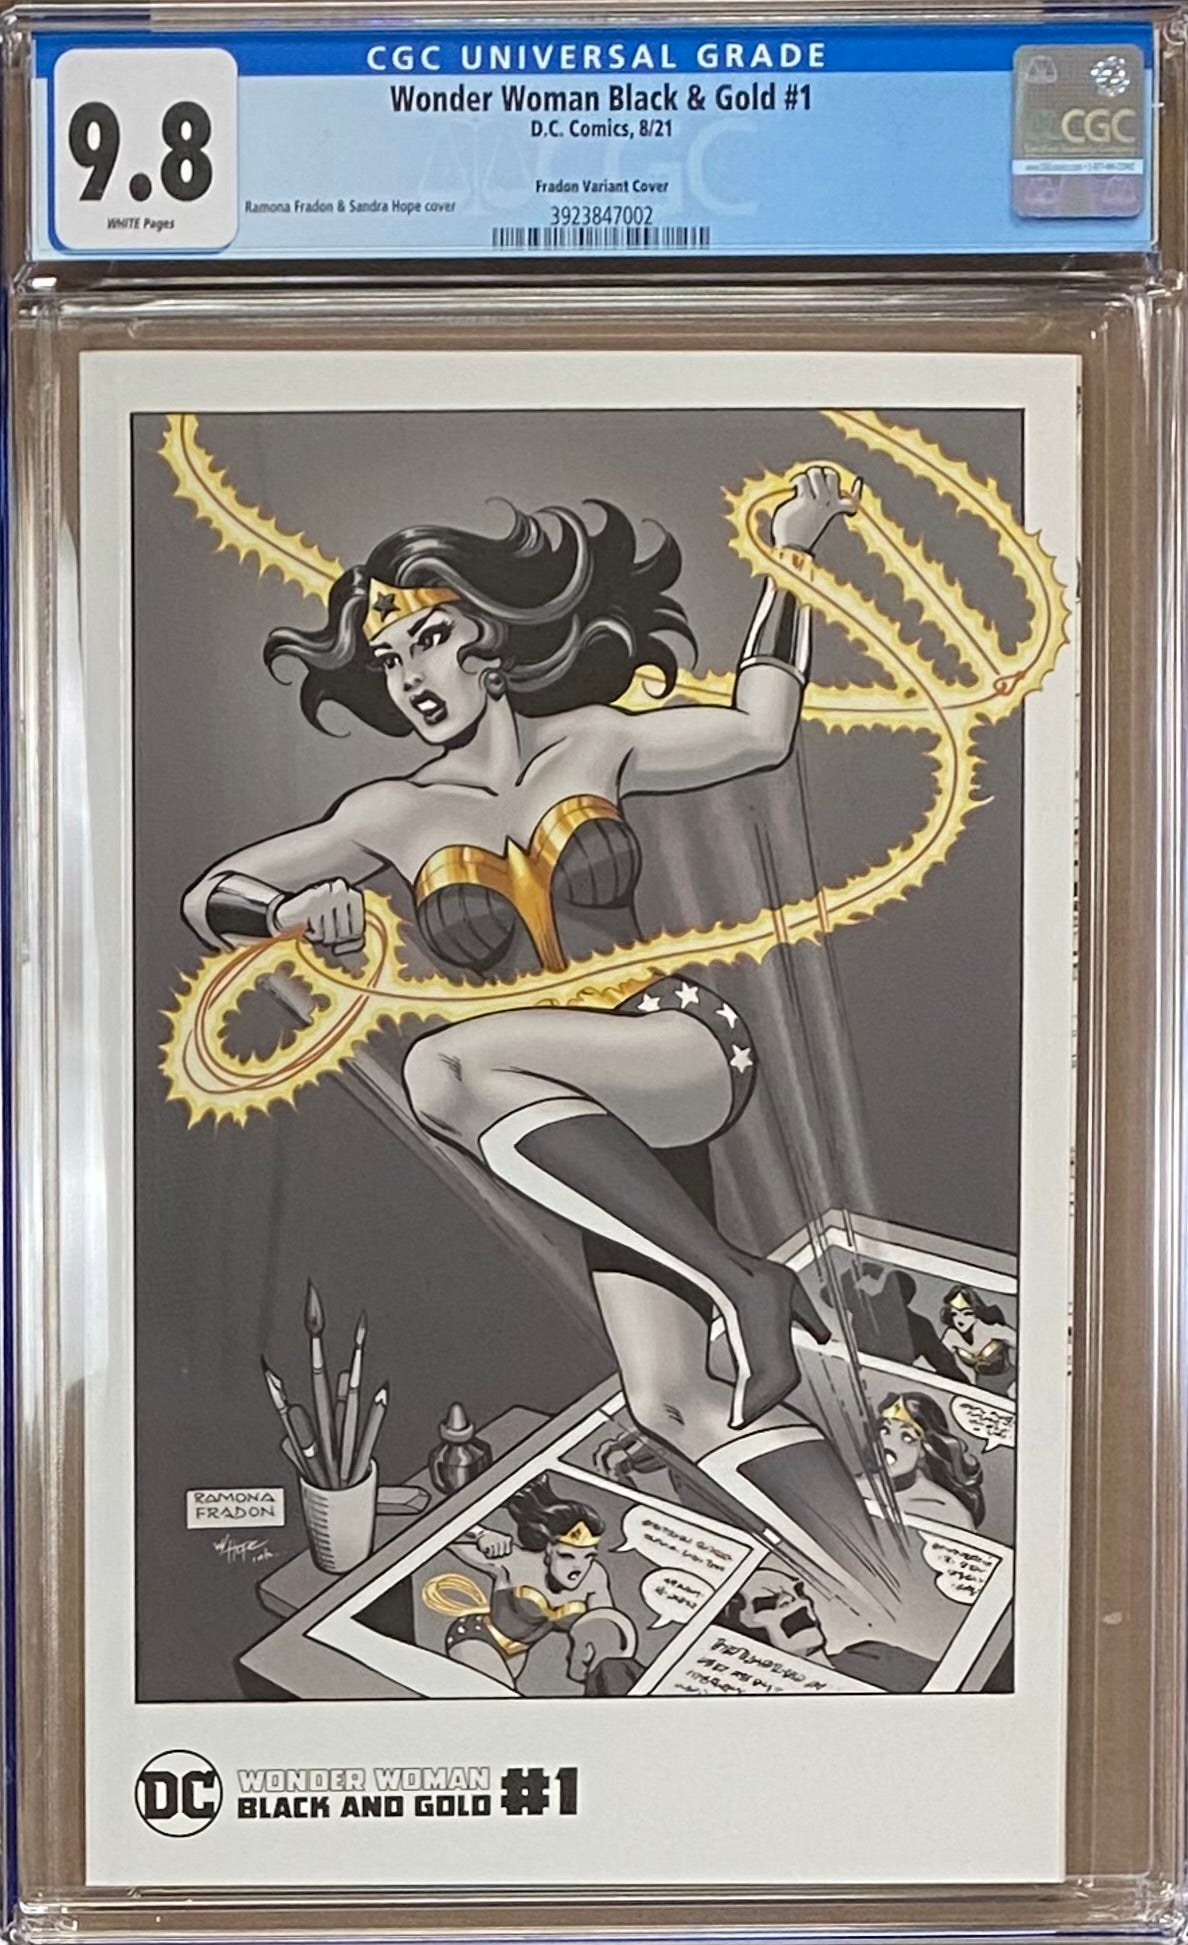 Wonder Woman: Black and Gold #1 1:25 Retailer Incentive Variant CGC 9.8